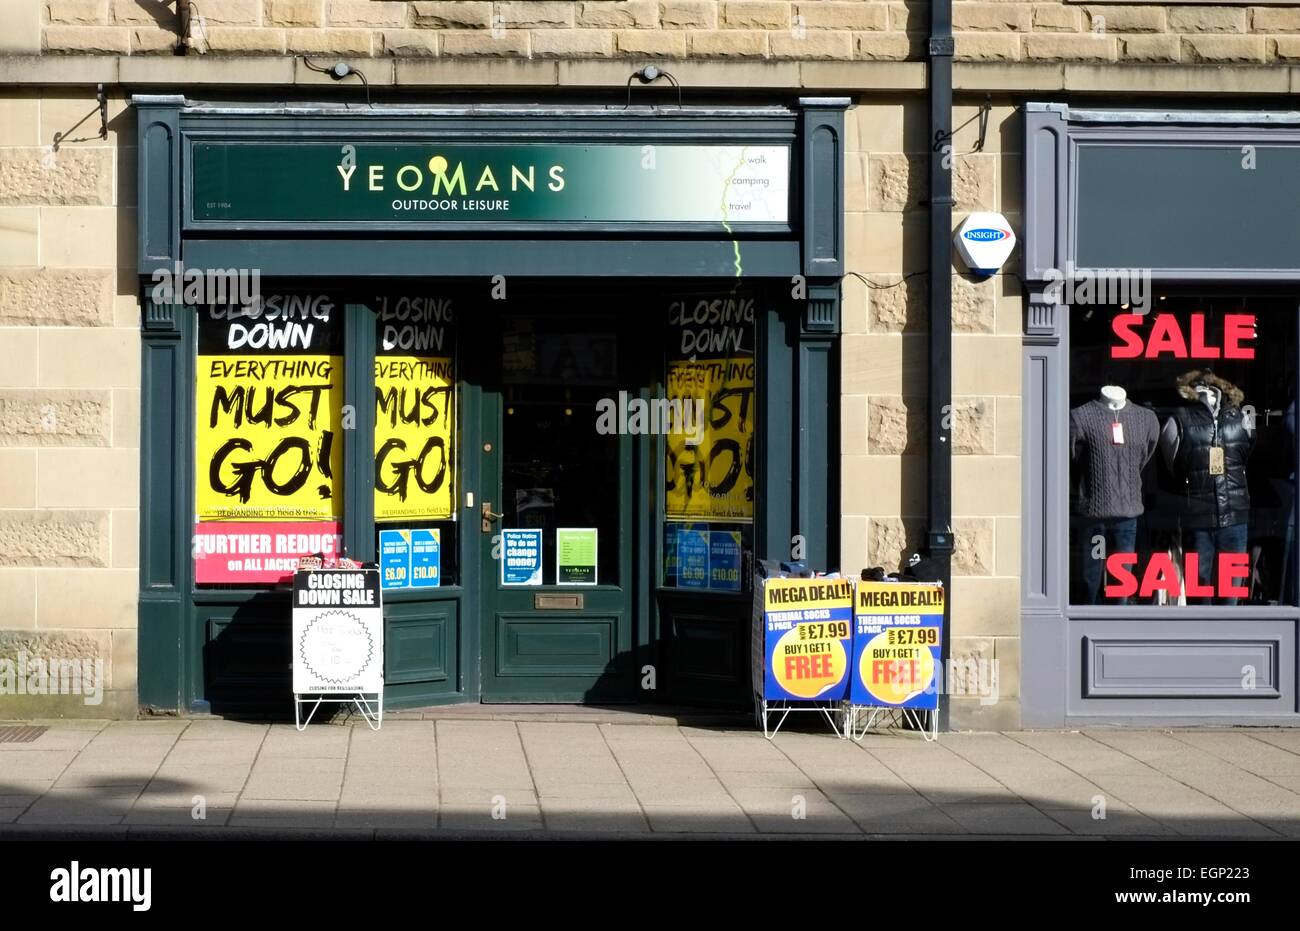 A Yeomans Outdoor leisure store England UK. Stock Photo